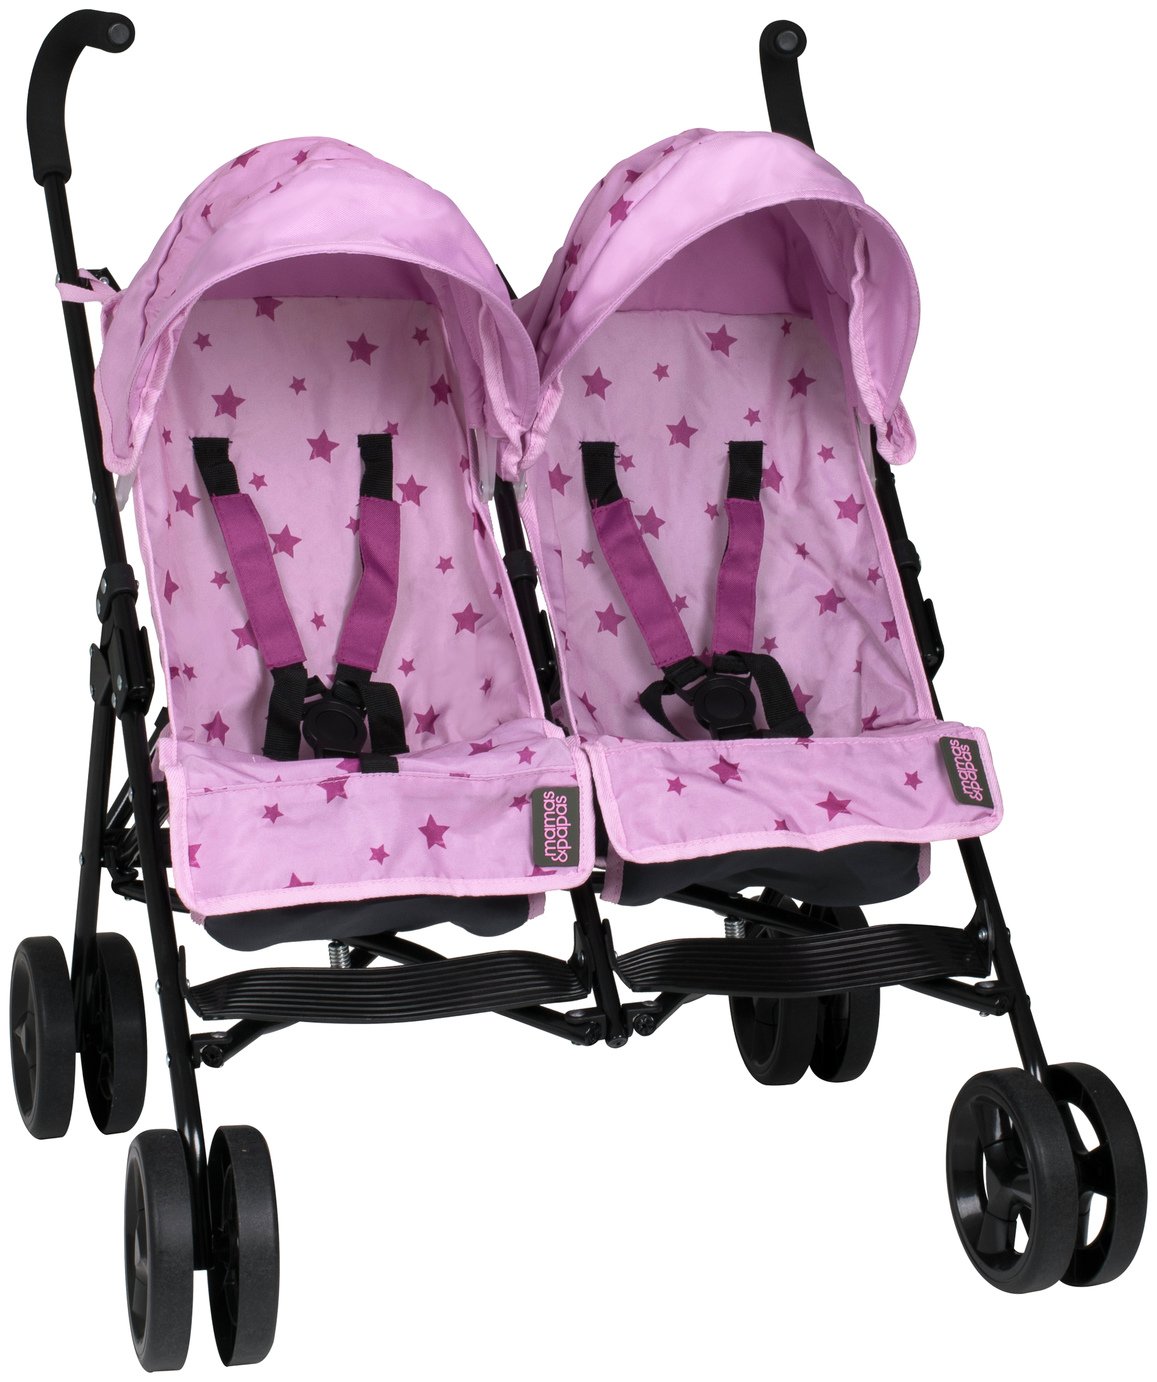 mamas and papas cruise stroller review